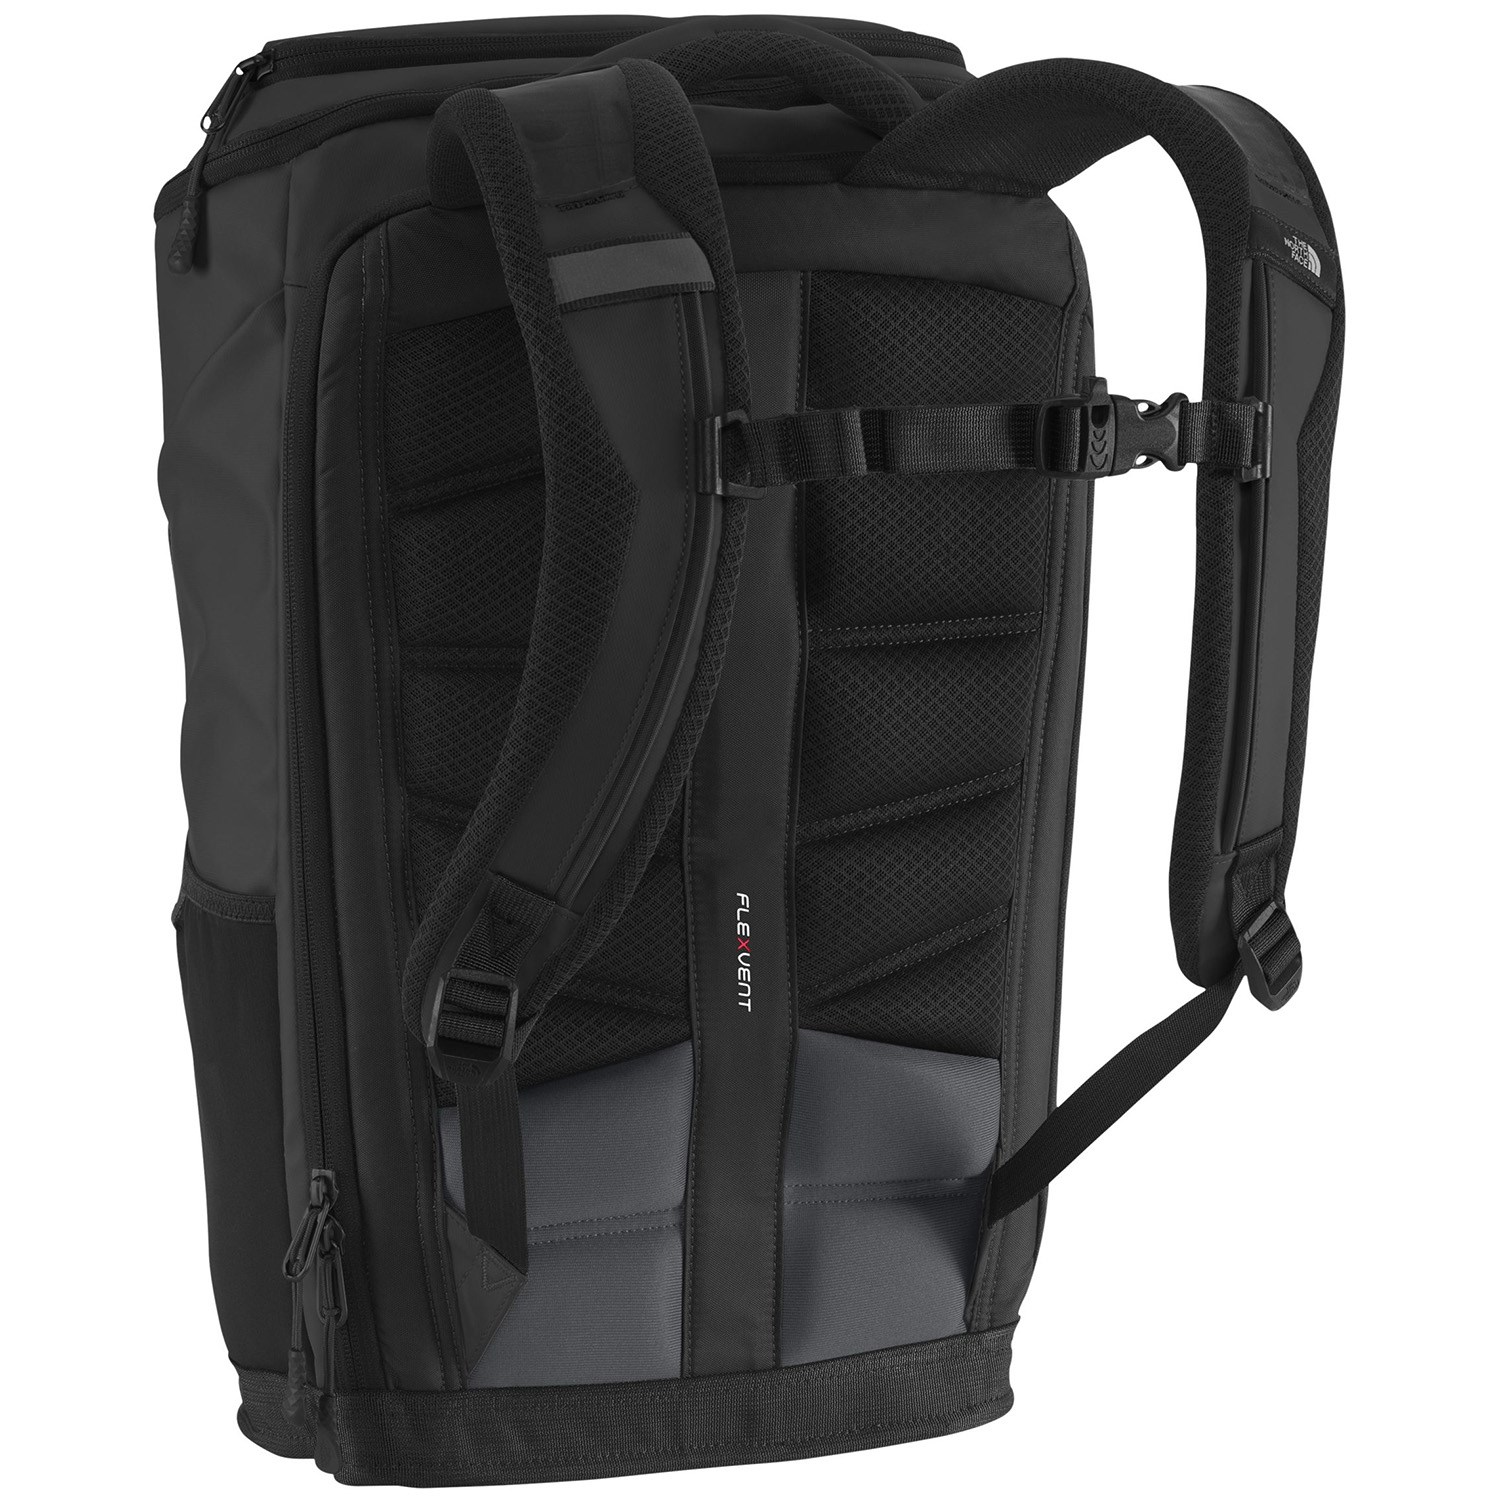 the north face backpack warranty